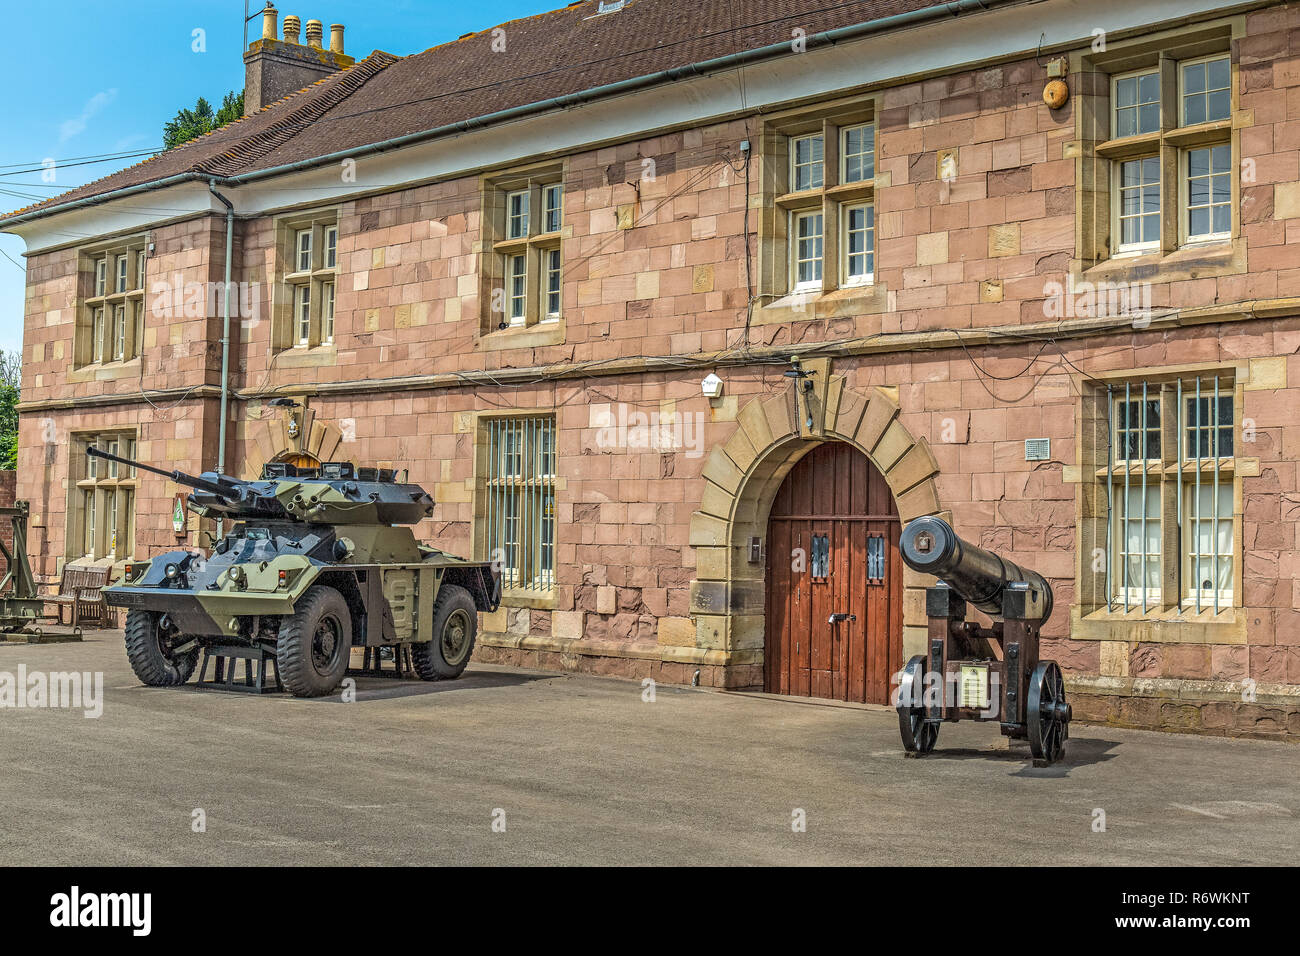 Monmouth Regimental Museum, located on Castle Hill in Monmouth, Wales. Stock Photo